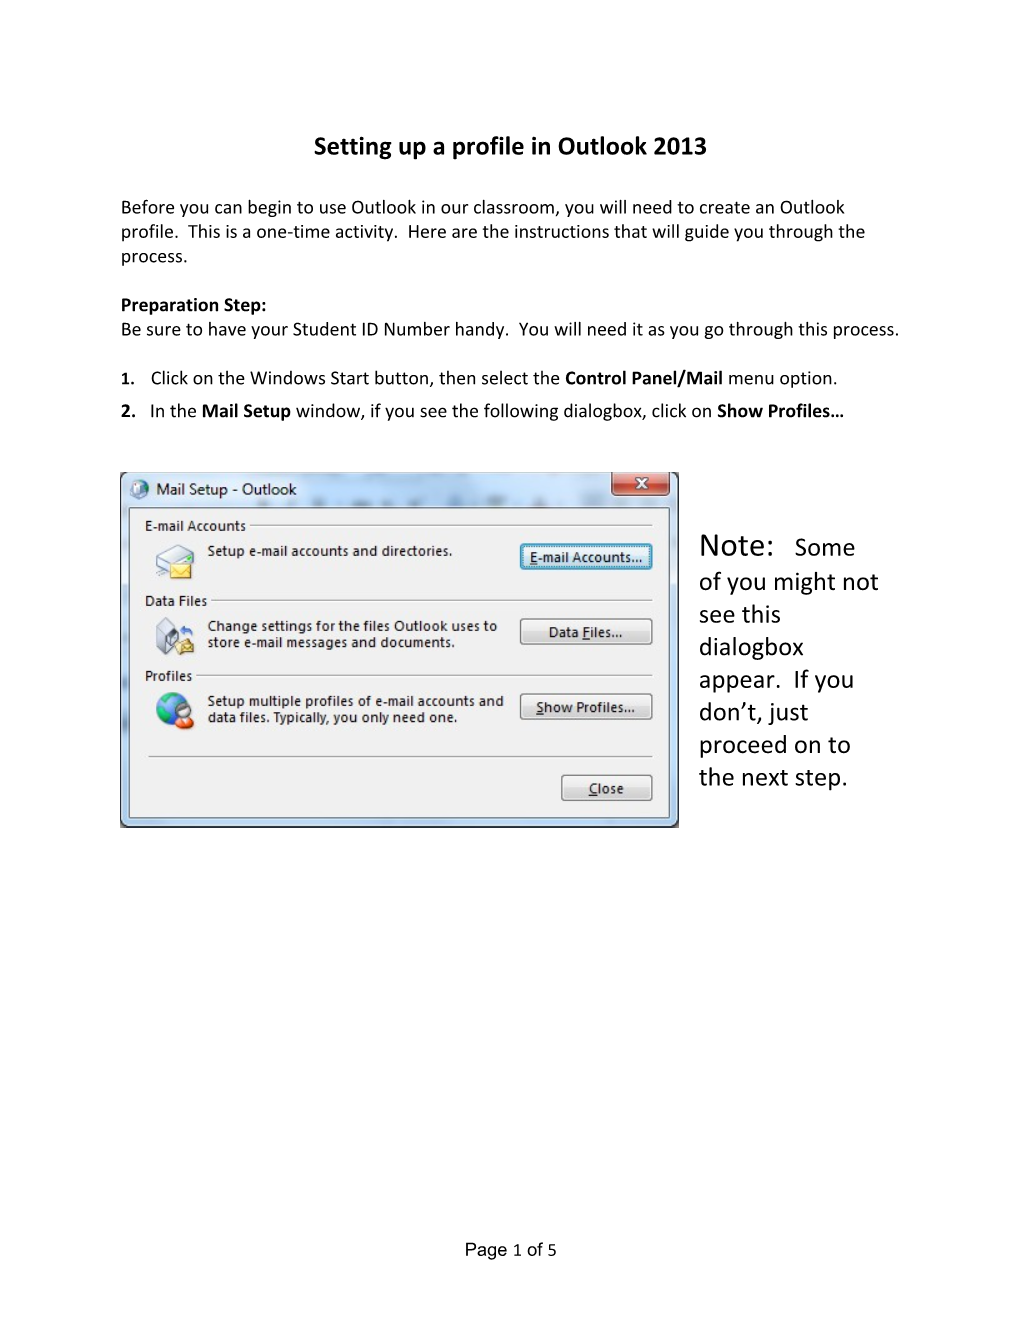 Setting up a Profile in Outlook 2013